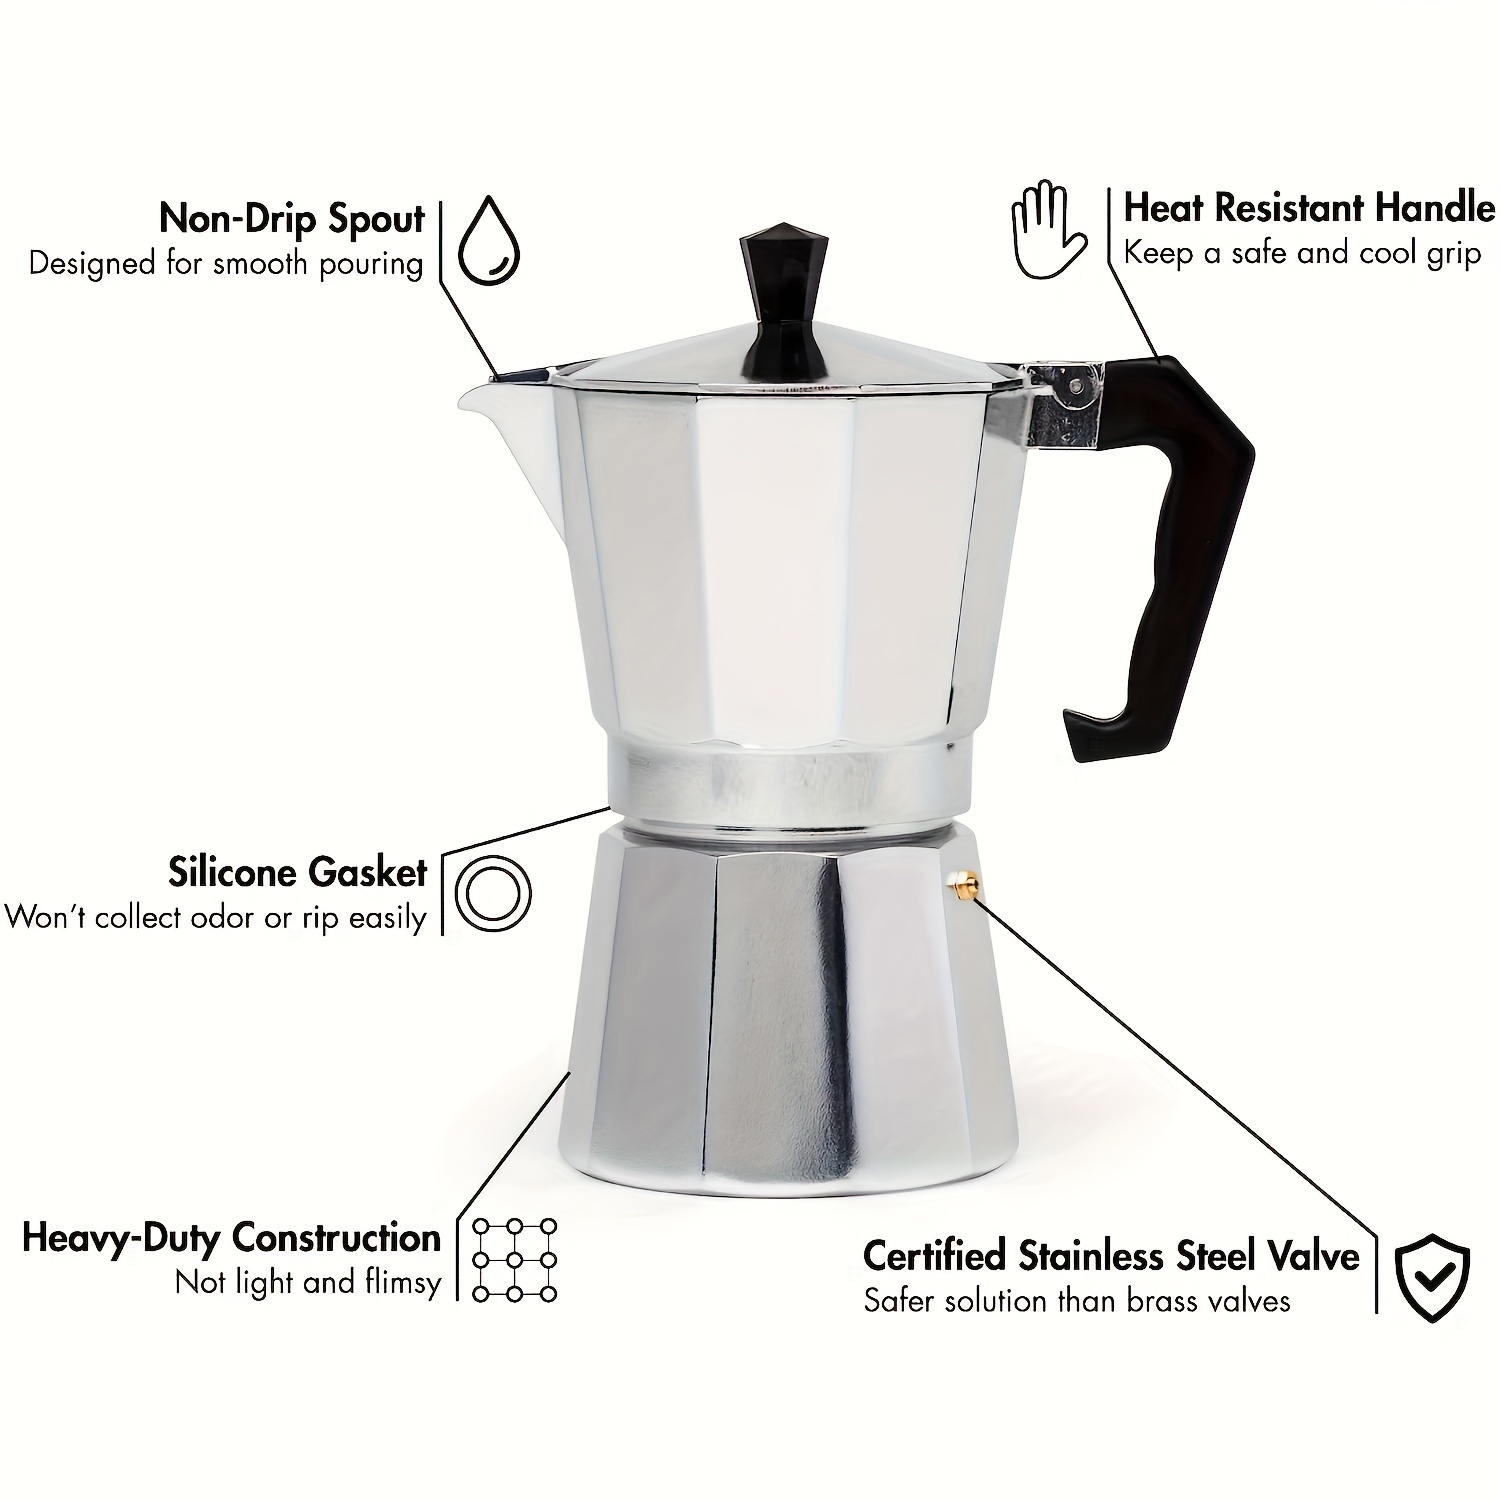 Is it safe to make coffee in an aluminum coffee maker?